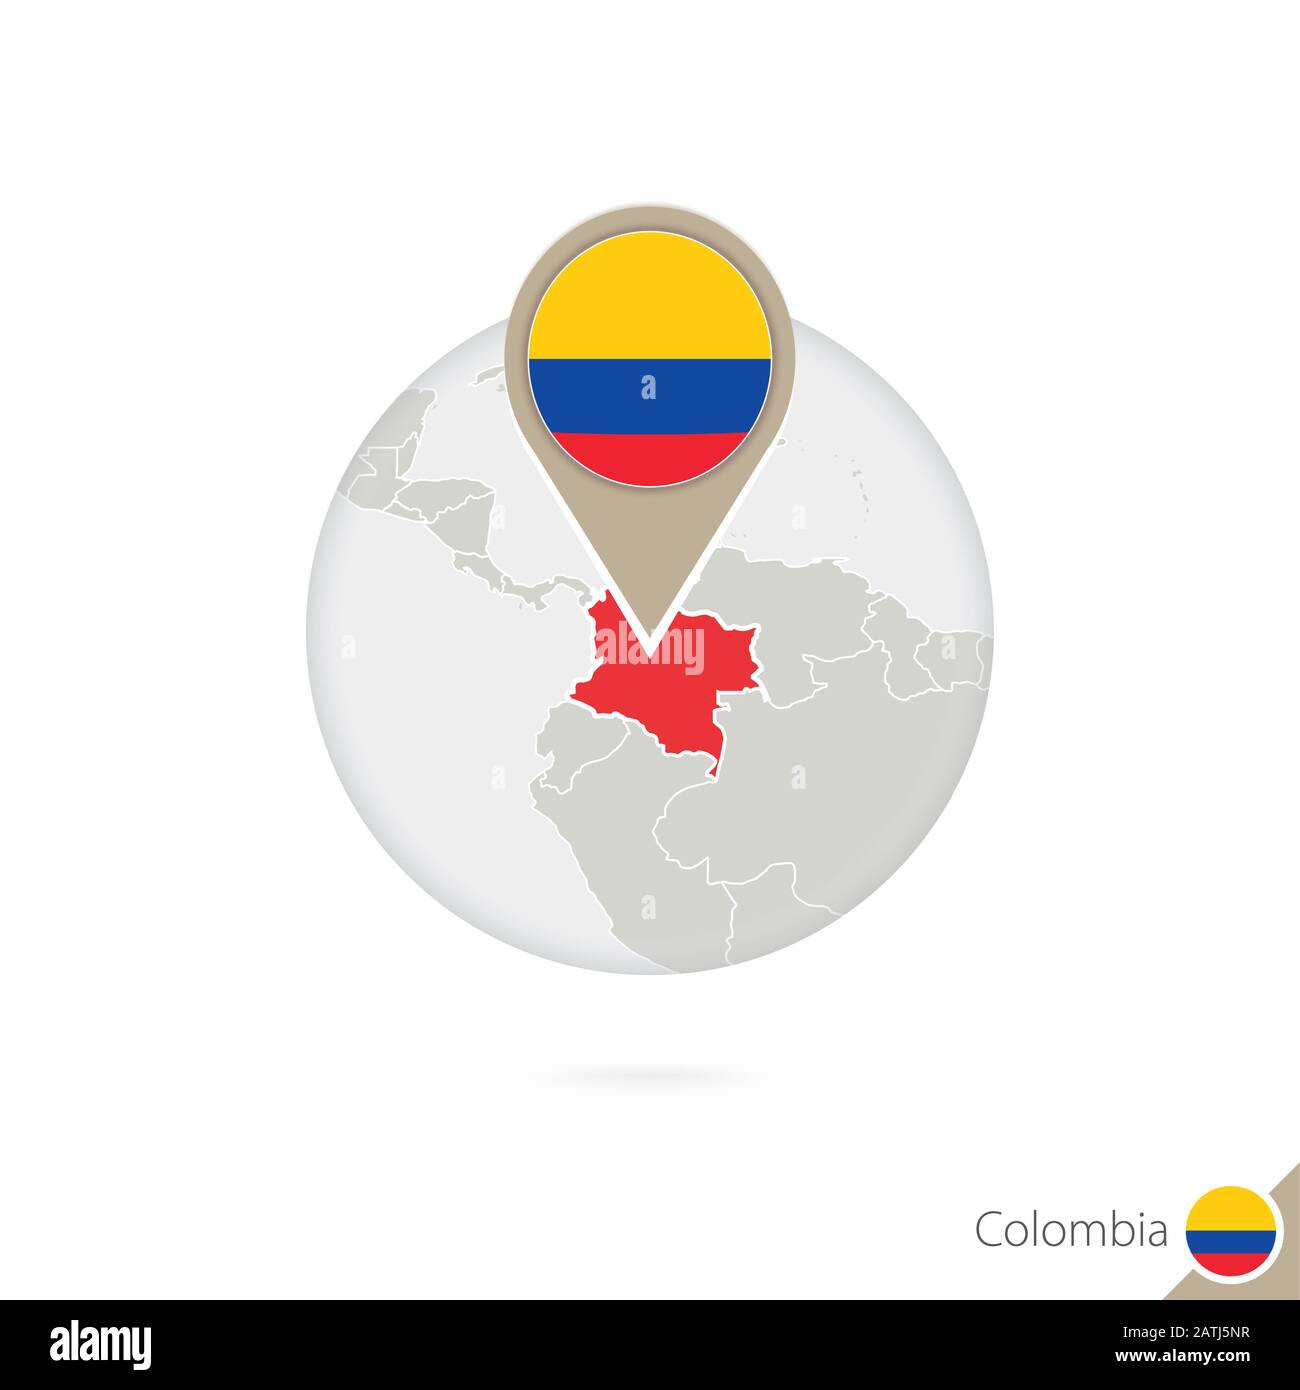 Colombia map and flag in circle. Map of Colombia, Colombia flag pin. Map of Colombia in the style of the globe. Vector Illustration. Stock Vector